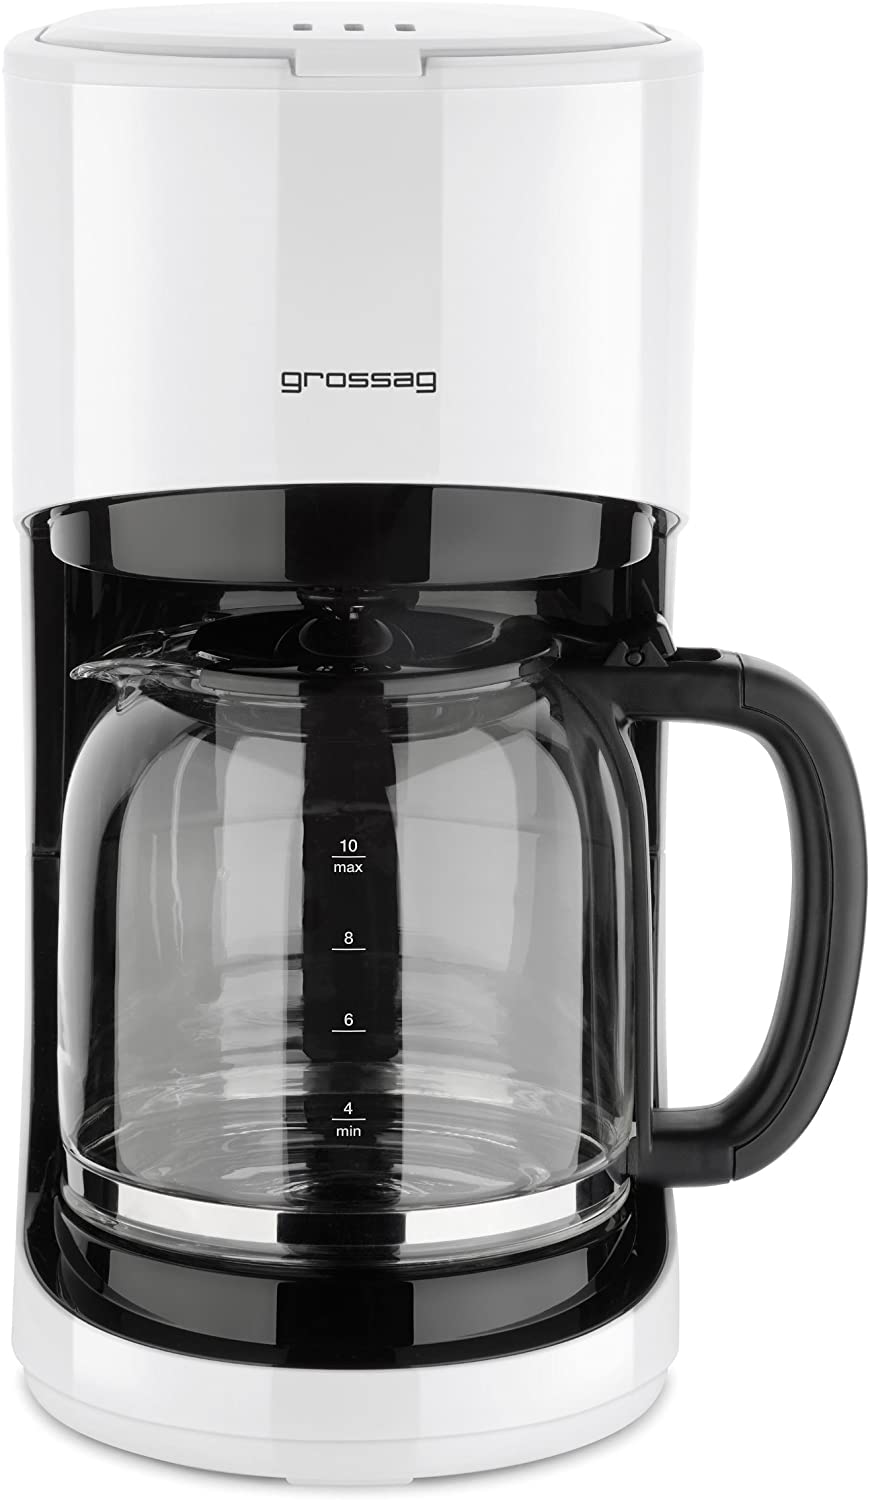 grossag Filter Coffee Machine with Glass Jug KA 70.10 | 1.4 Litre for 10 Cups of Coffee | 900 Watt and 240 Volt | Black - White